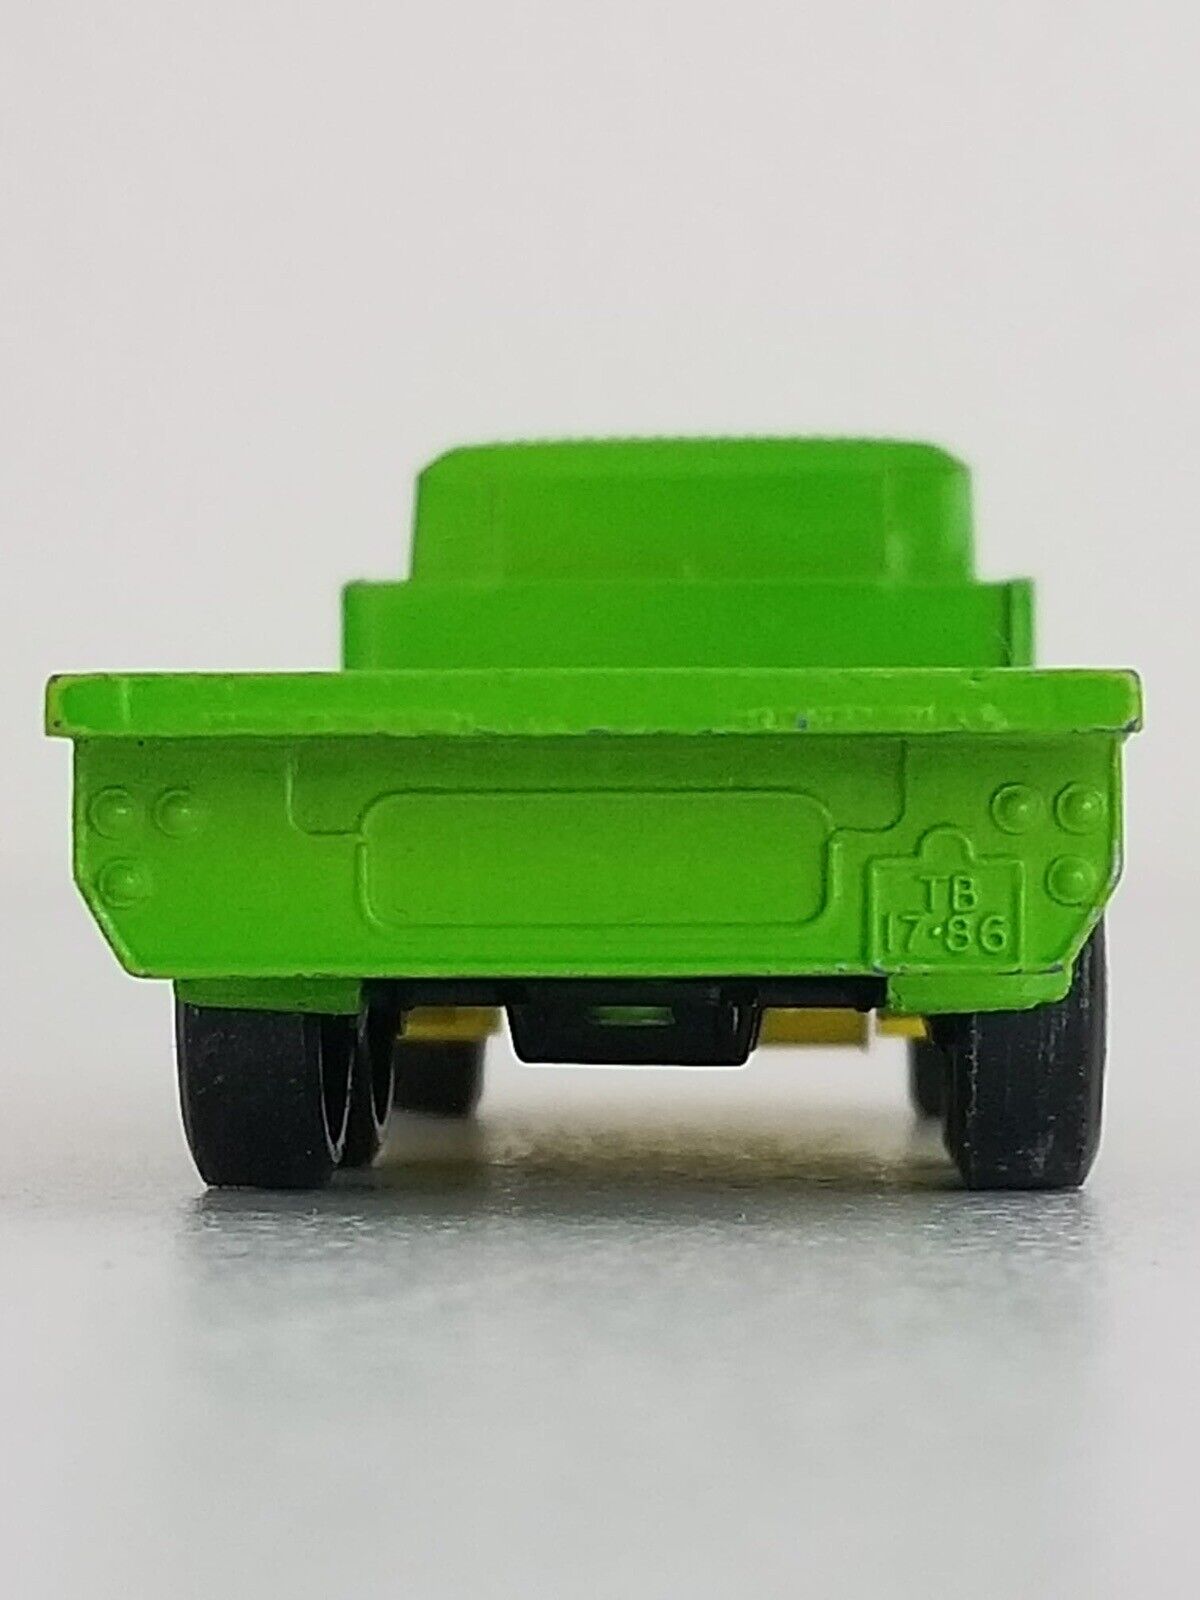 Matchbox Super Kings DAF Truck K-13/20 from 1971 - Vintage Classic Toy Vehicle with Original Green and Yellow Design - TreasuTiques